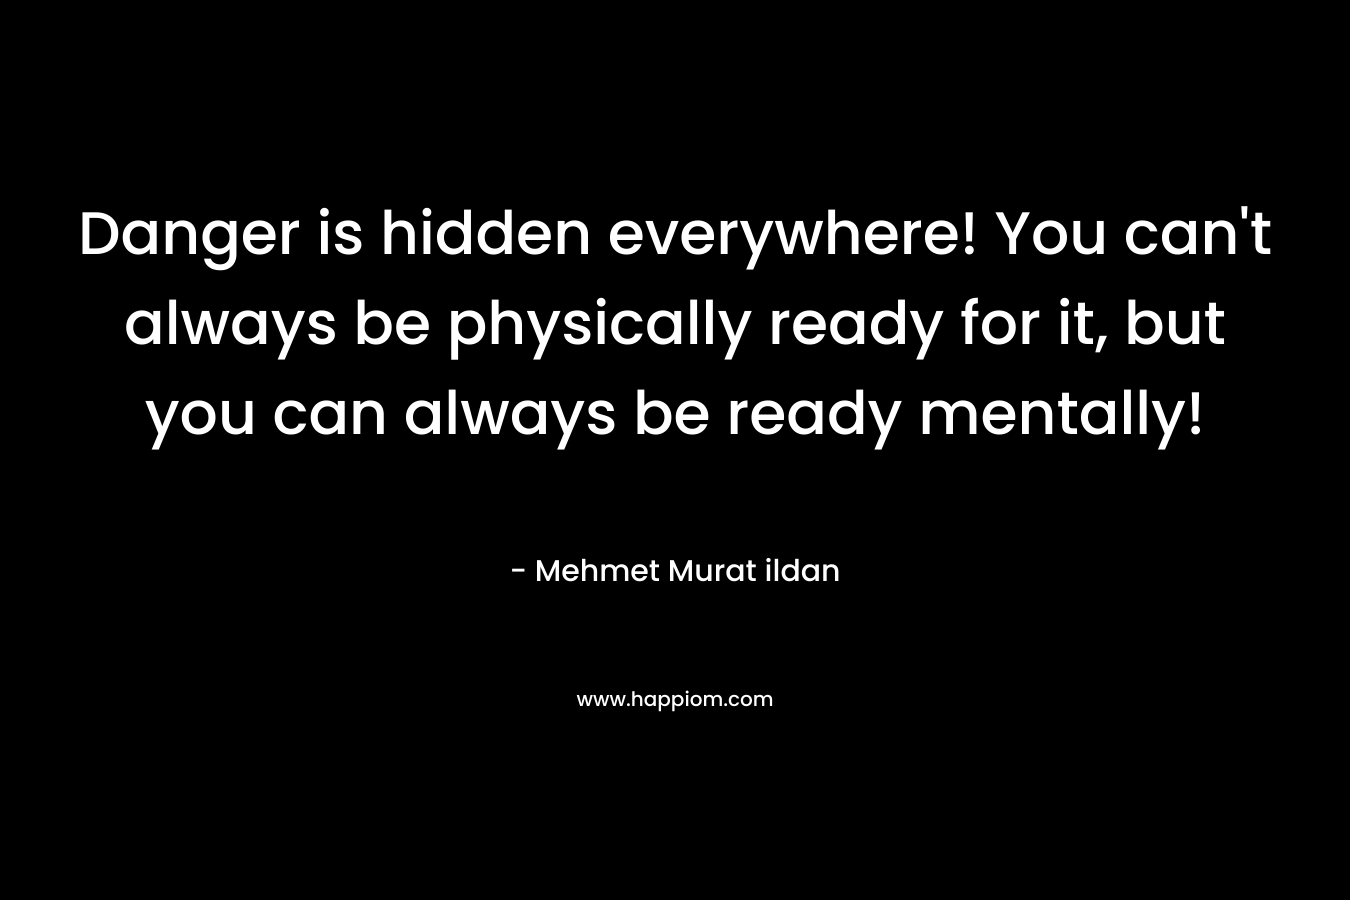 Danger is hidden everywhere! You can’t always be physically ready for it, but you can always be ready mentally! – Mehmet Murat ildan